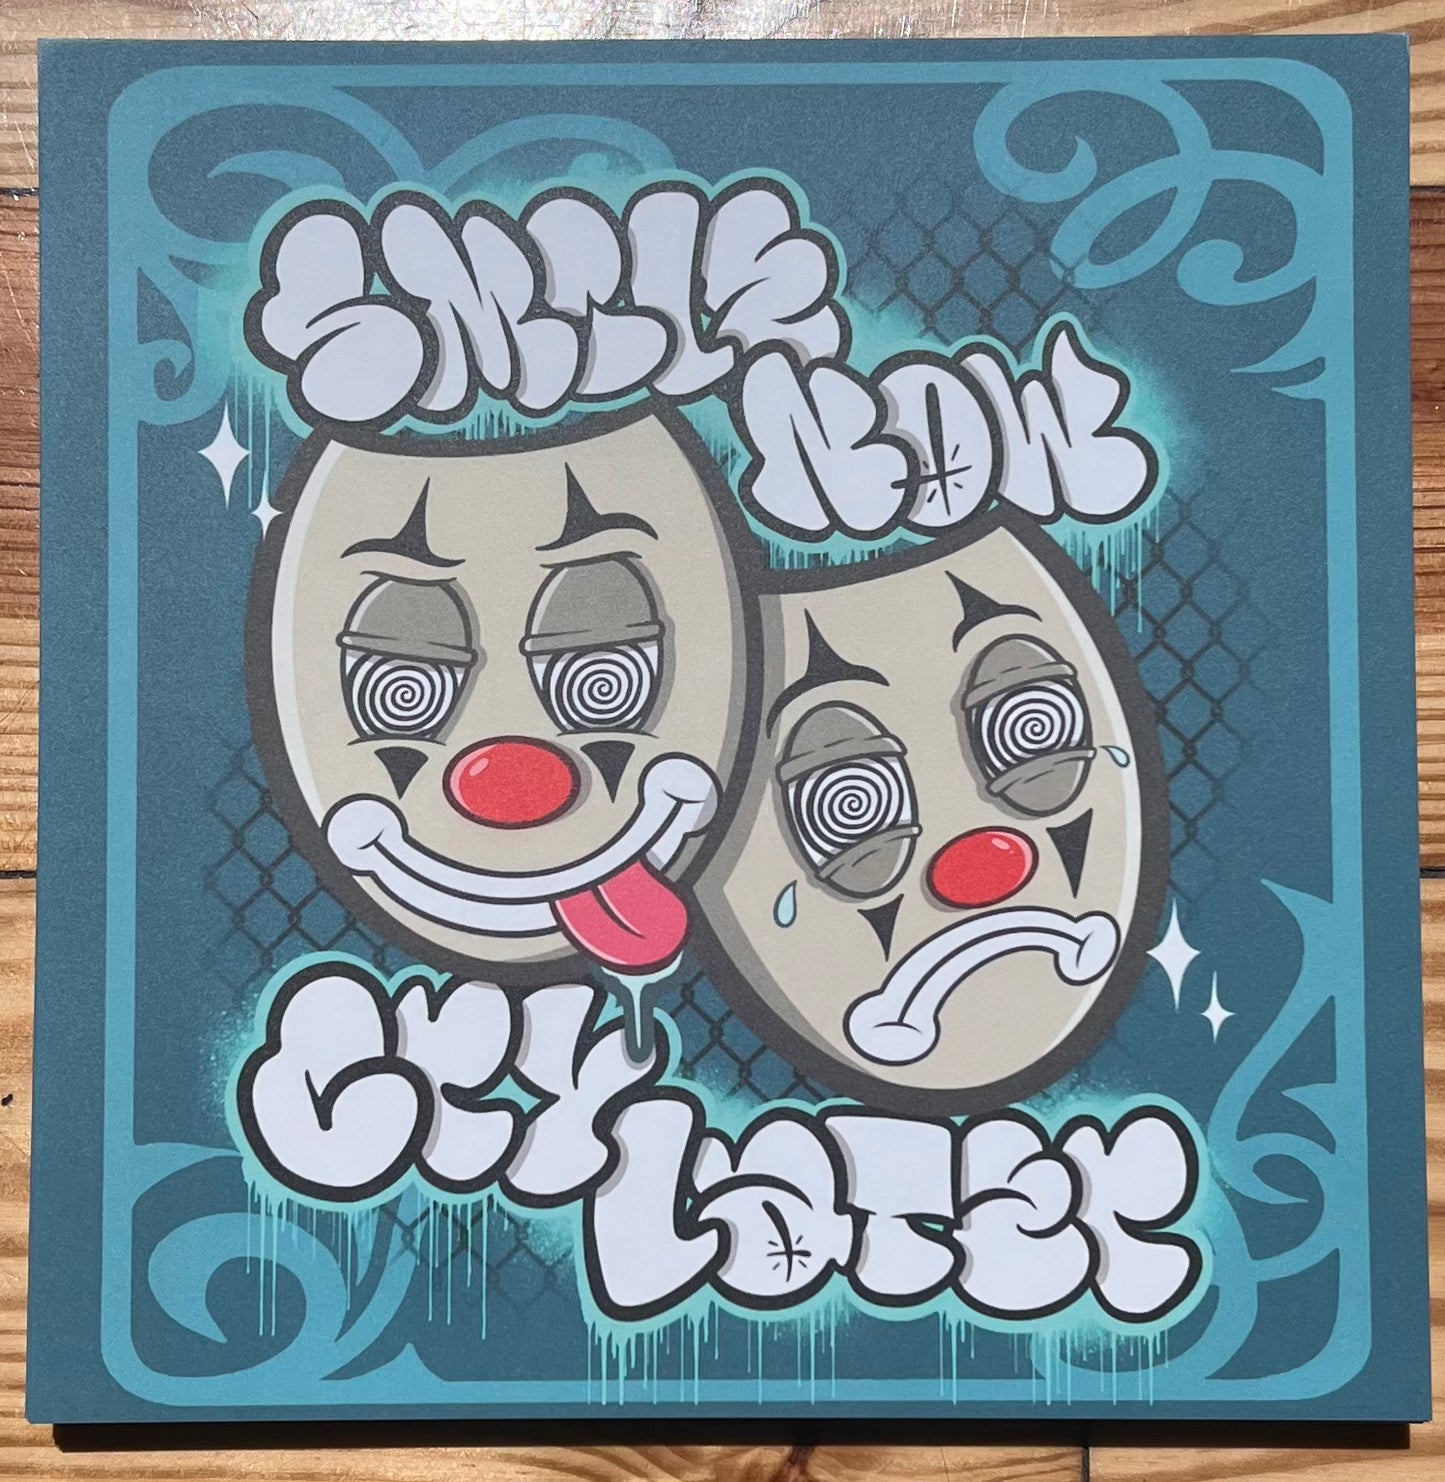 "Smile Now, Cry Later" by Jose Scott - 12x12 FRAMED